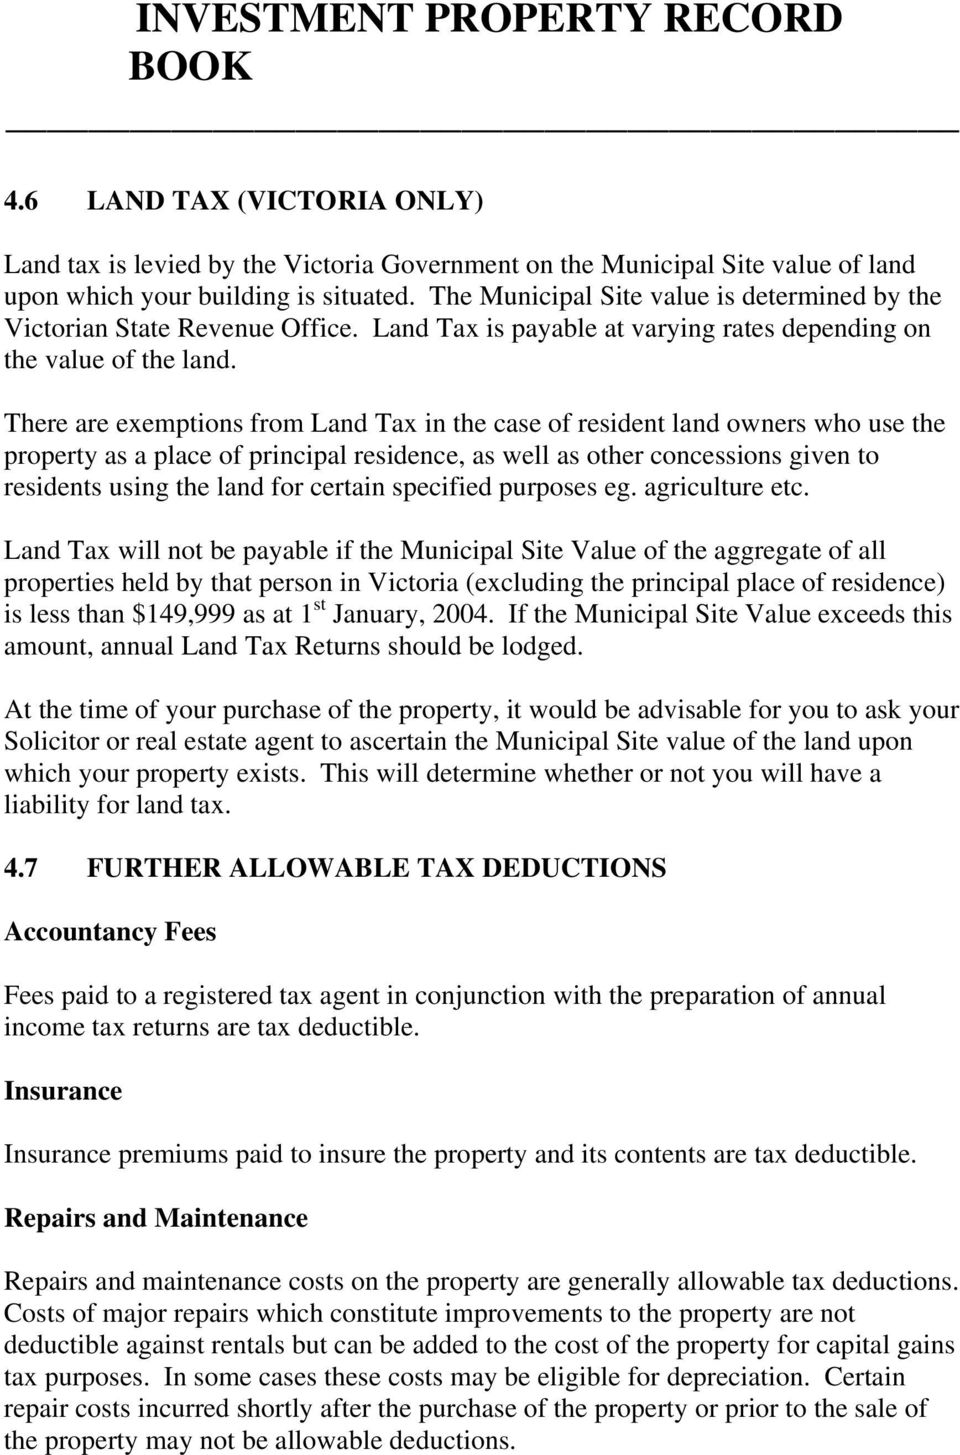 There are exemptions from Land Tax in the case of resident land owners who use the property as a place of principal residence, as well as other concessions given to residents using the land for